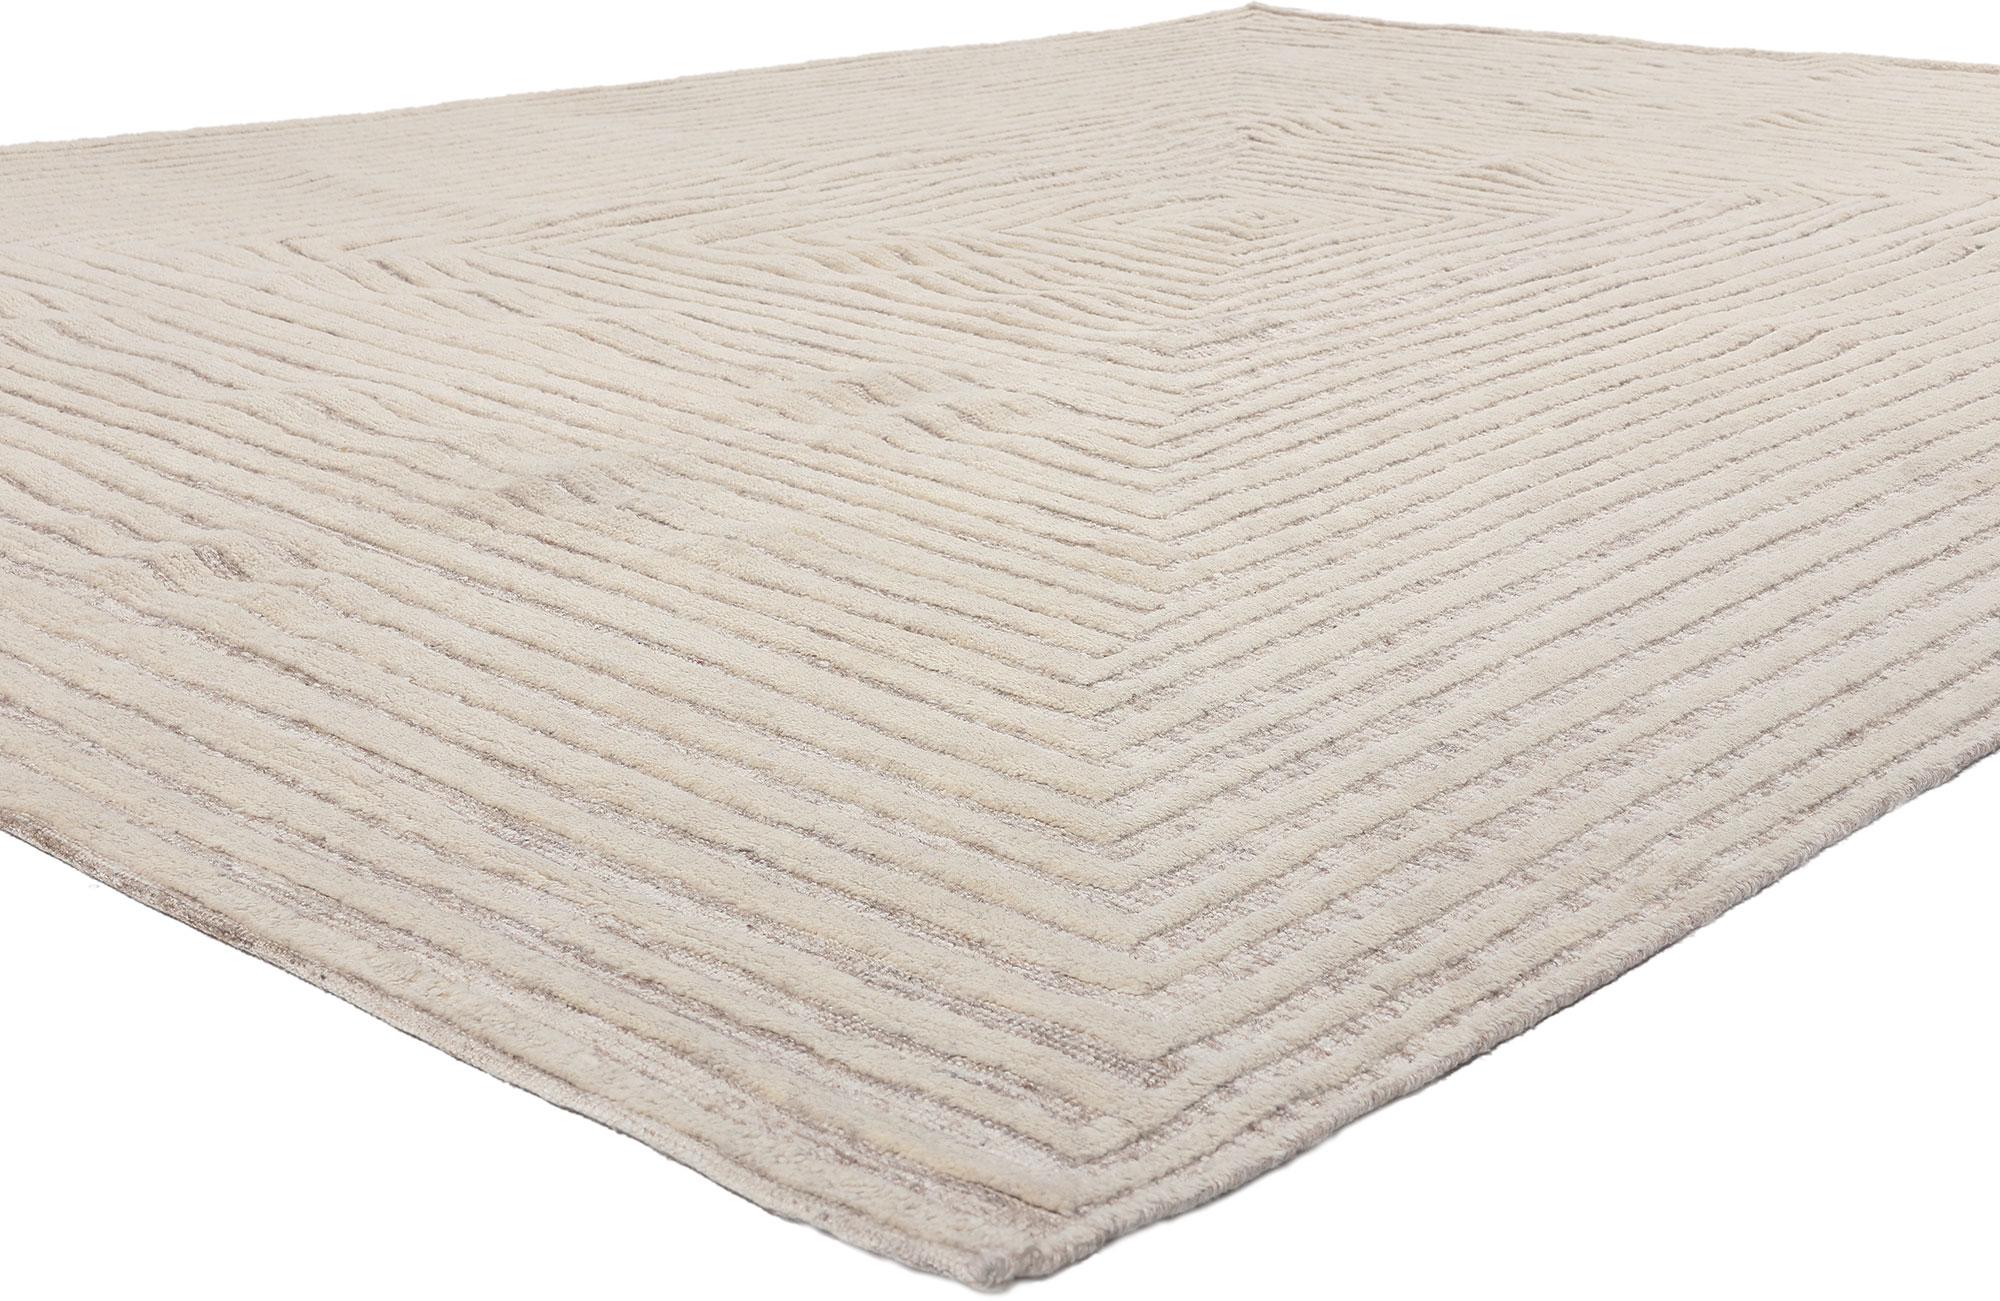 30817 Neutral High-Low Modern Area Rug, 09'00 x 12'01.
Sublime simplicity meets tantalizing texture in this neutral high-low modern rug. The raised design and neutral colors woven into this piece work together creating a soft and subtle yet elevated